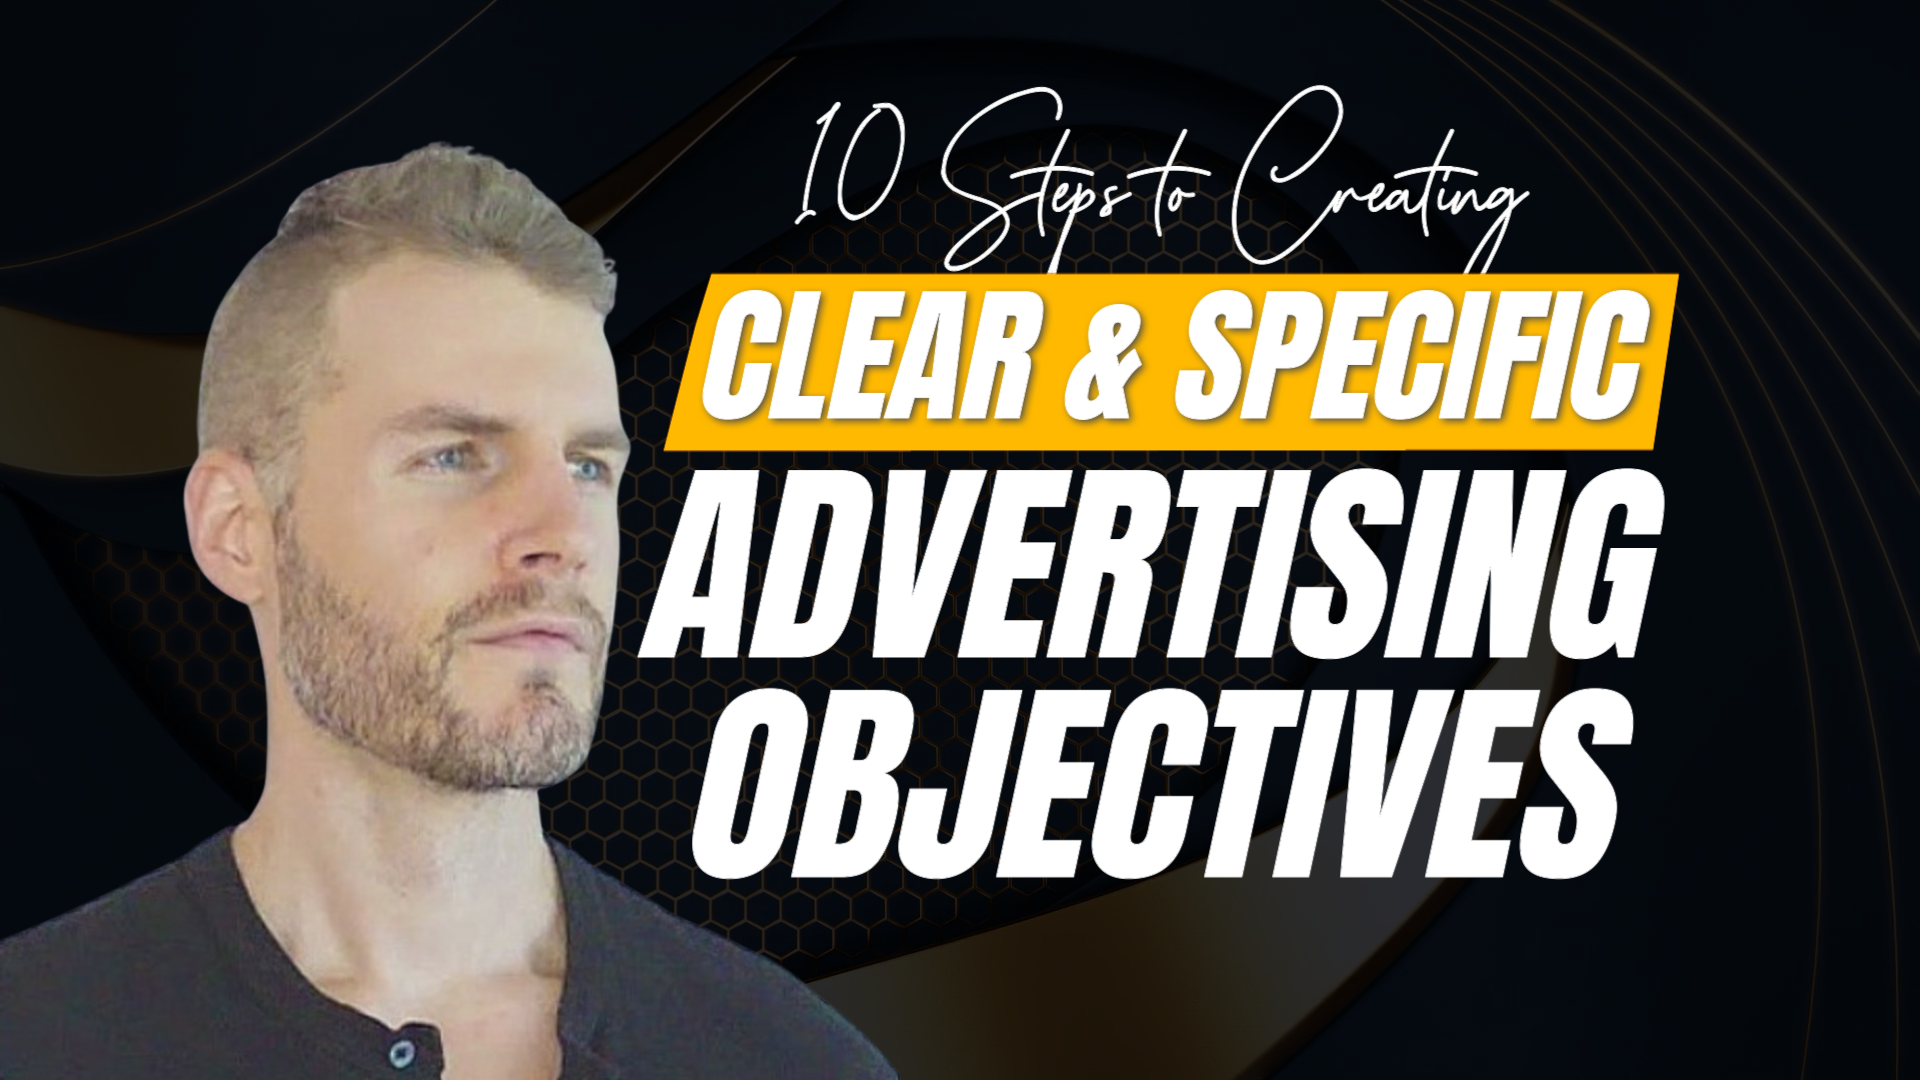 10 Steps to Creating Clear and Specific Advertising Objectives